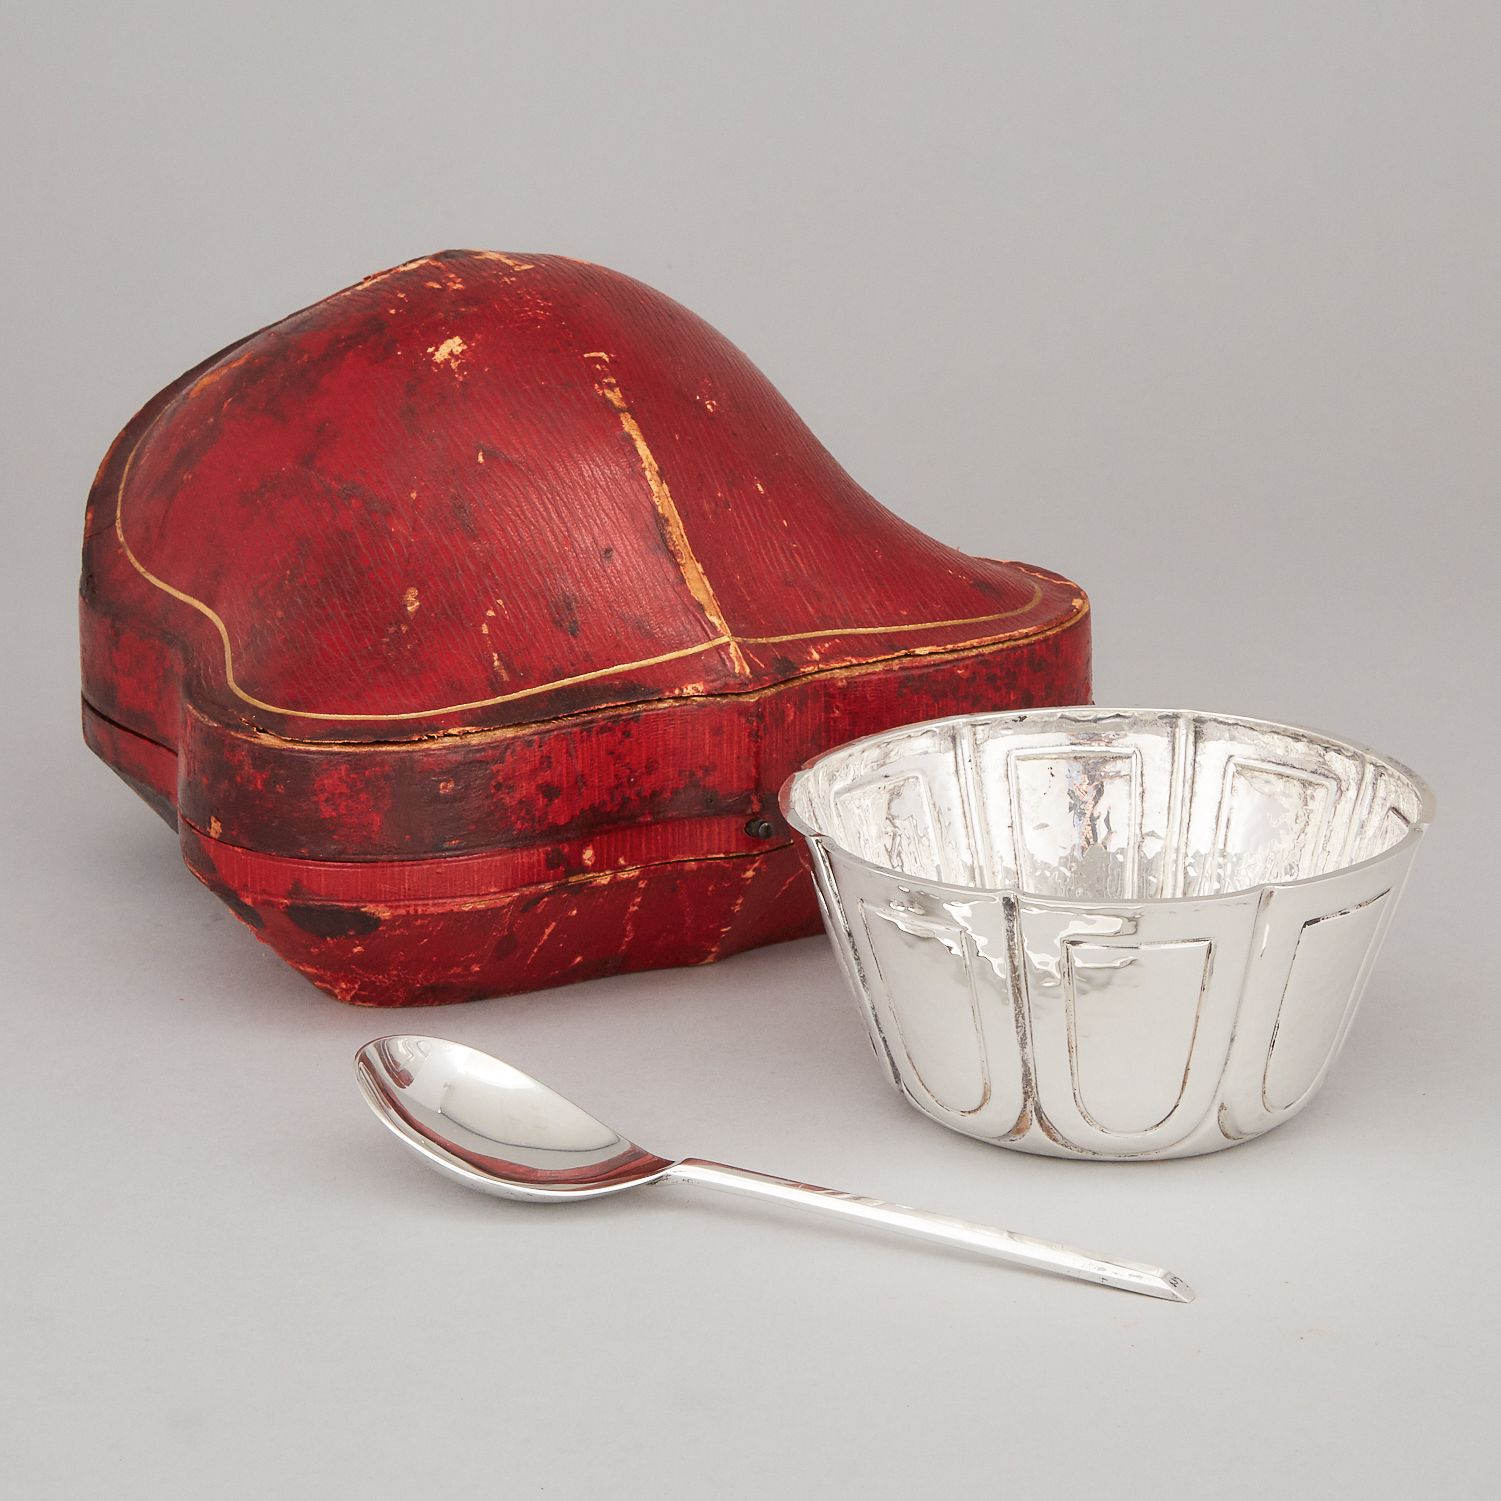 Edwardian Silver Bowl and Spoon, William Comyns, London, 1904